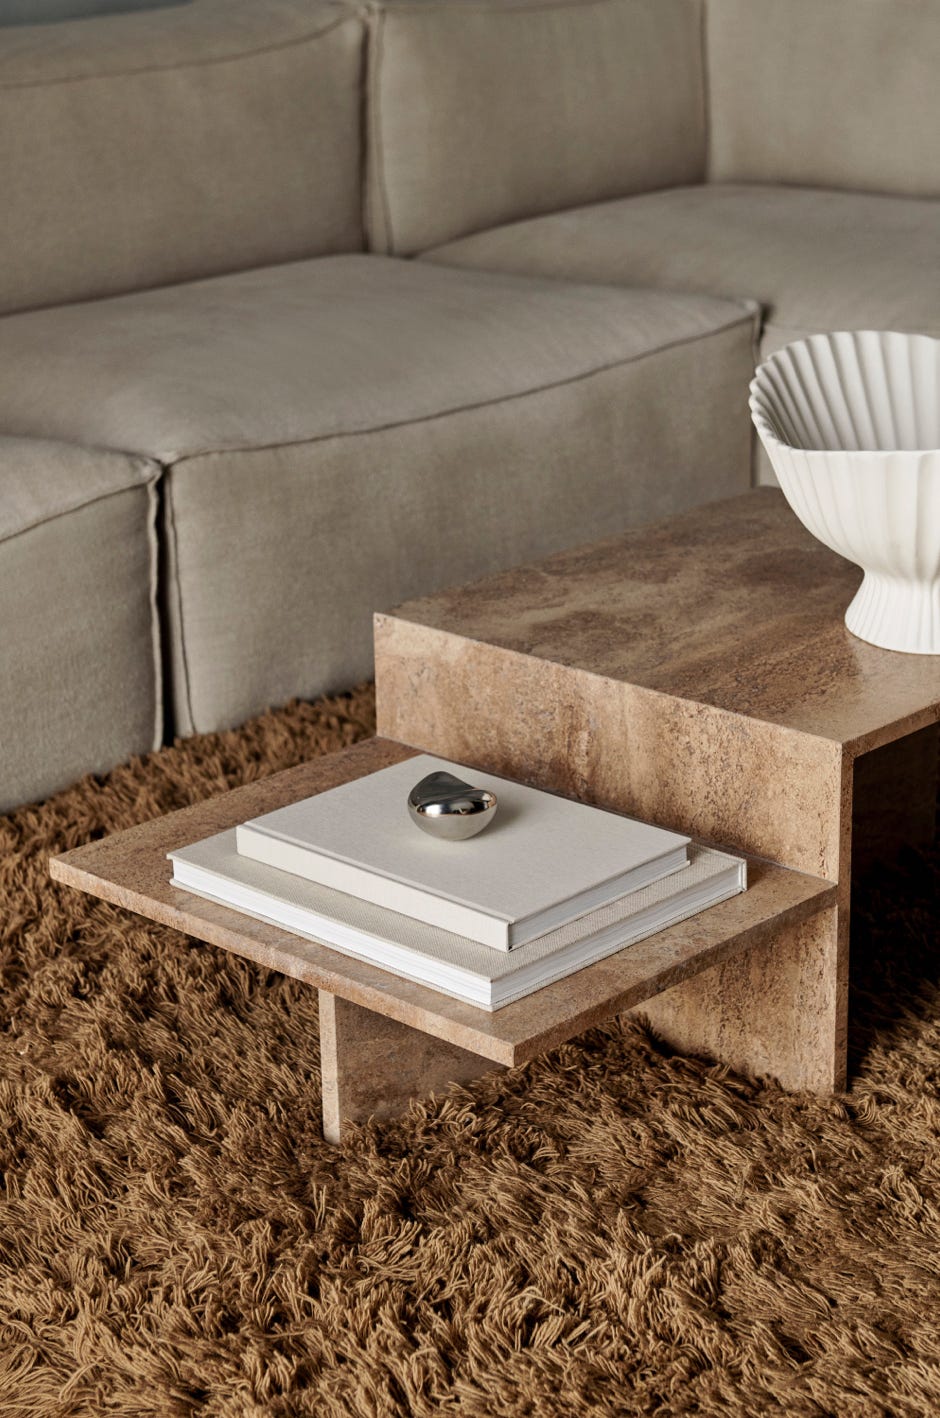 Distinct coffee table and side table